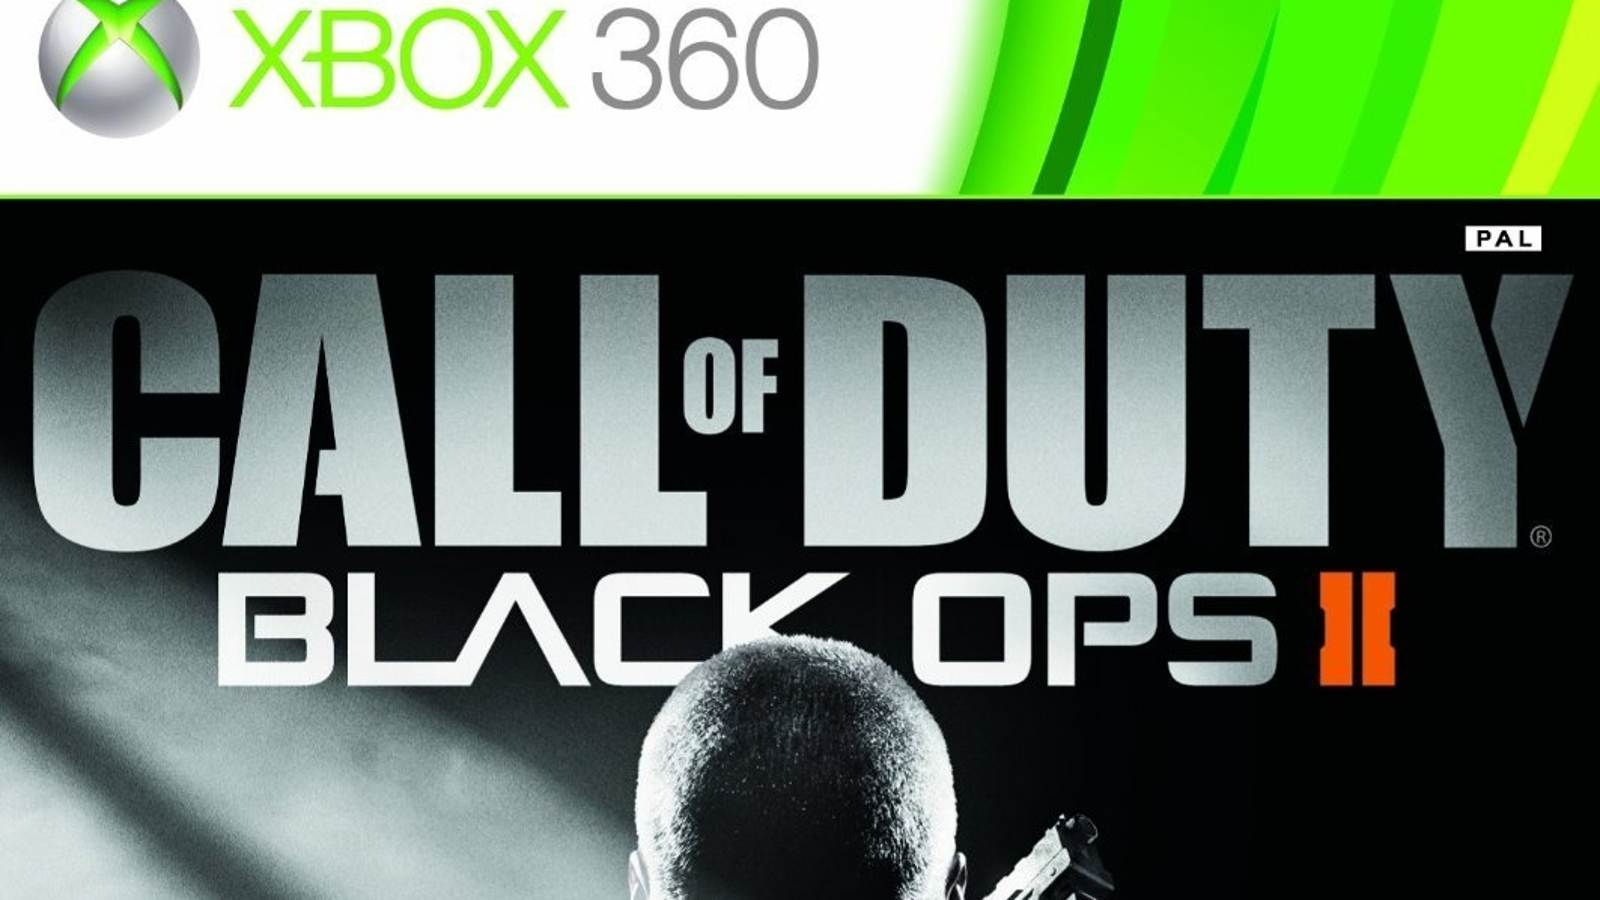 After five years of Xbox exclusivity, Call of Duty switches to